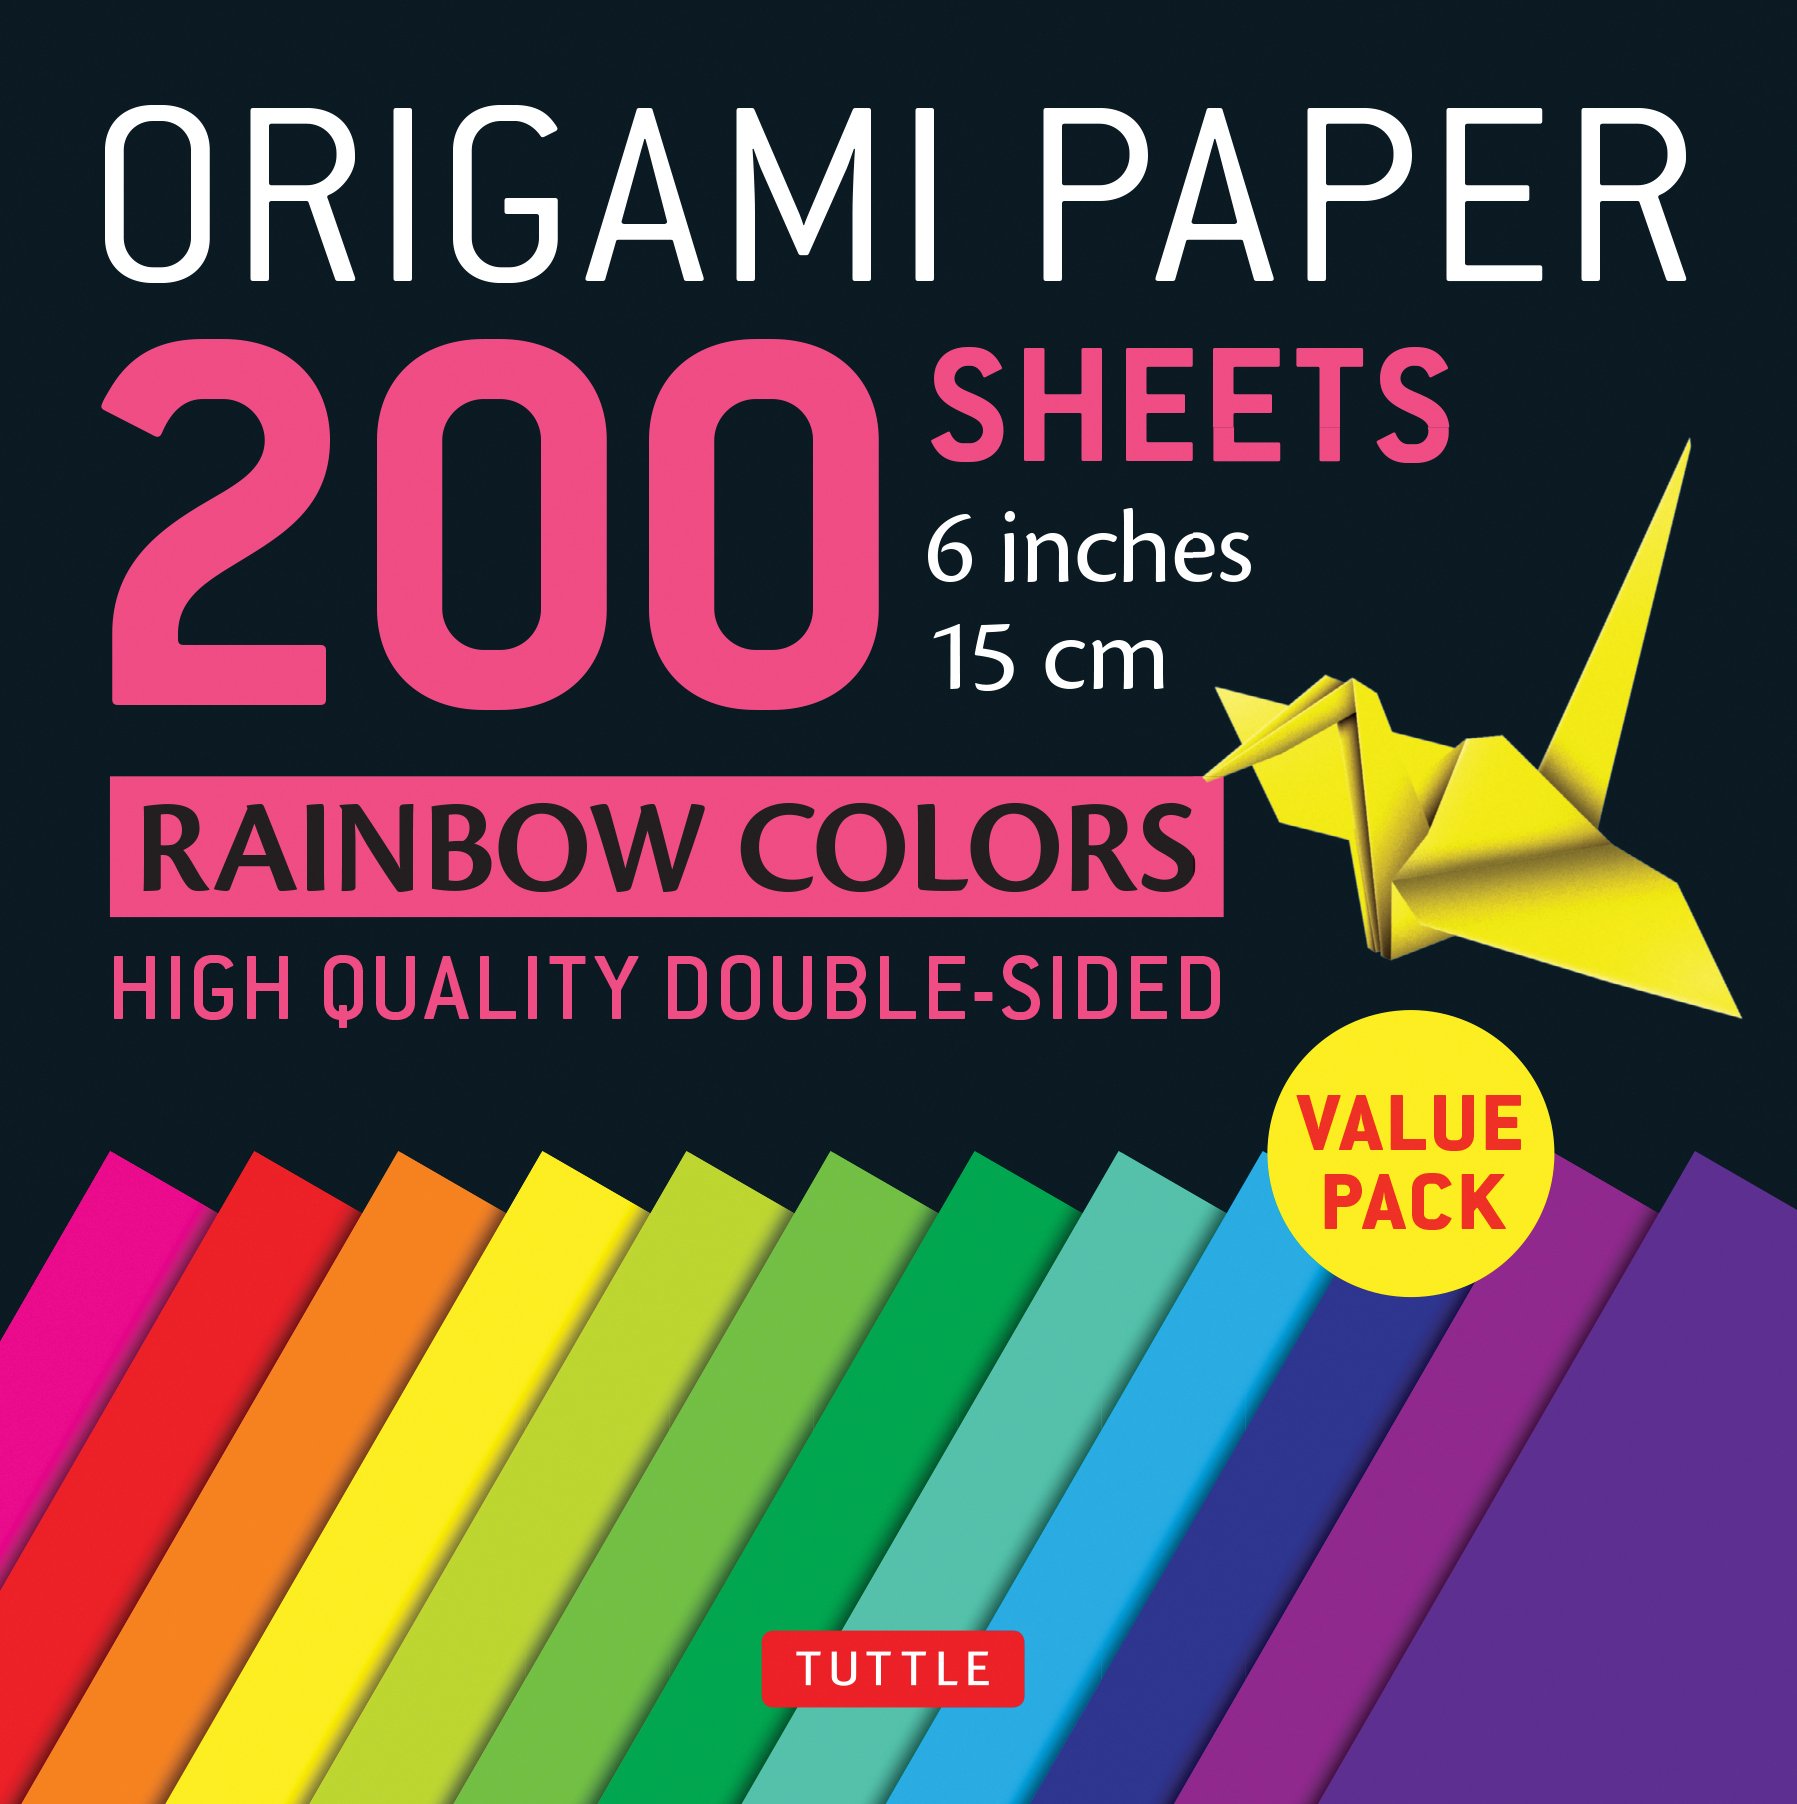 5 – Vibrant double-sided origami paper, how to make an origami heart